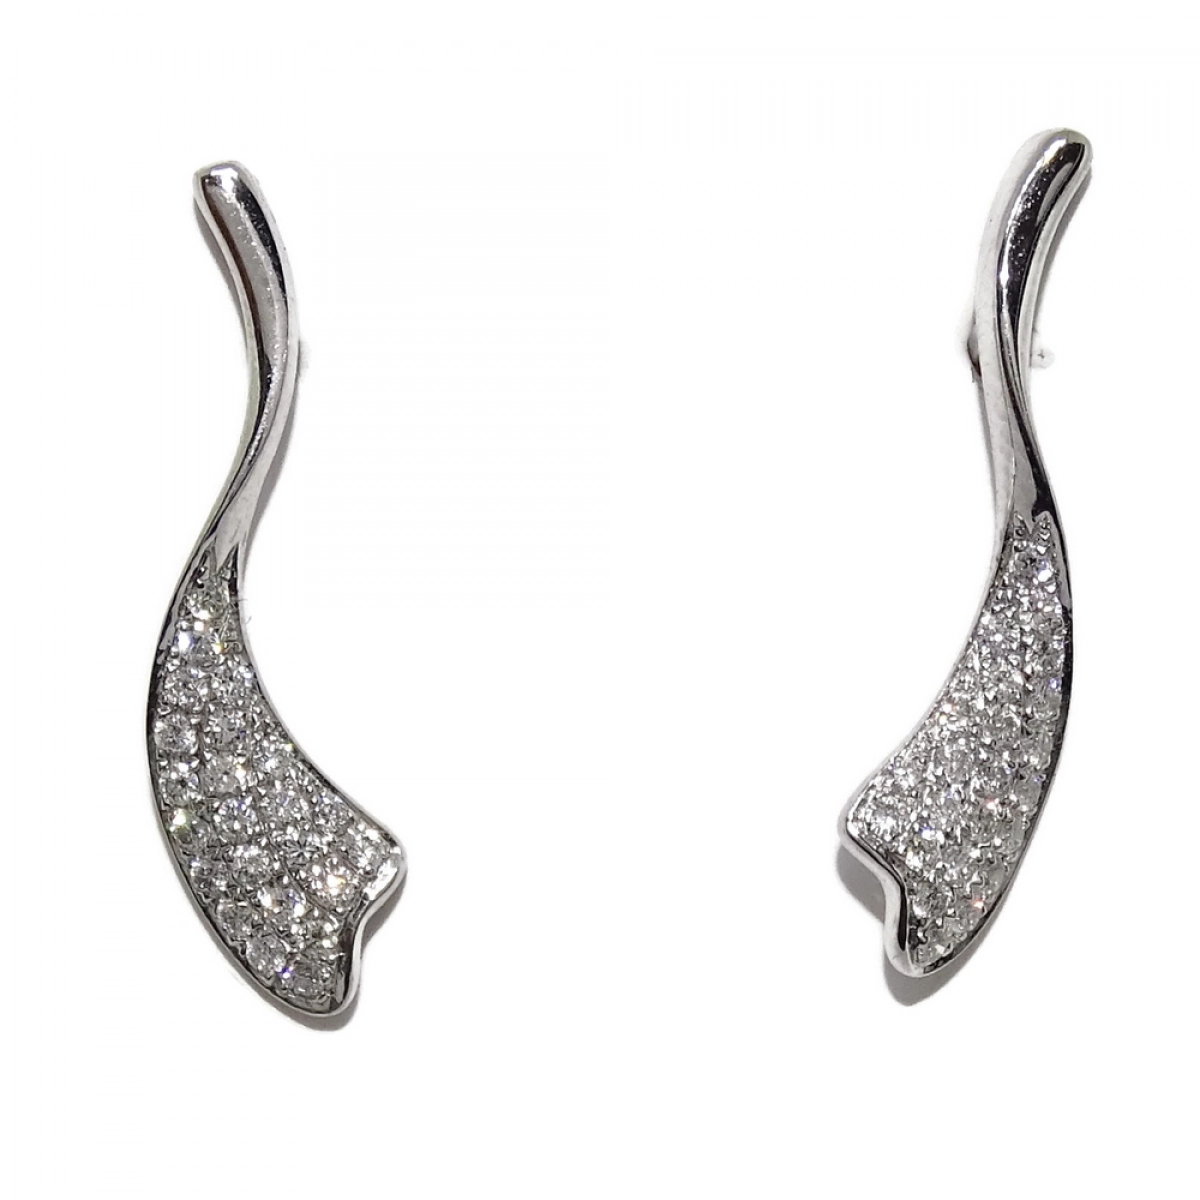 PRECIOUS DANGLING EARRINGS IN 18K WHITE GOLD WITH 0.45 CTS OF DIAMONDS NEVER SAY NEVER